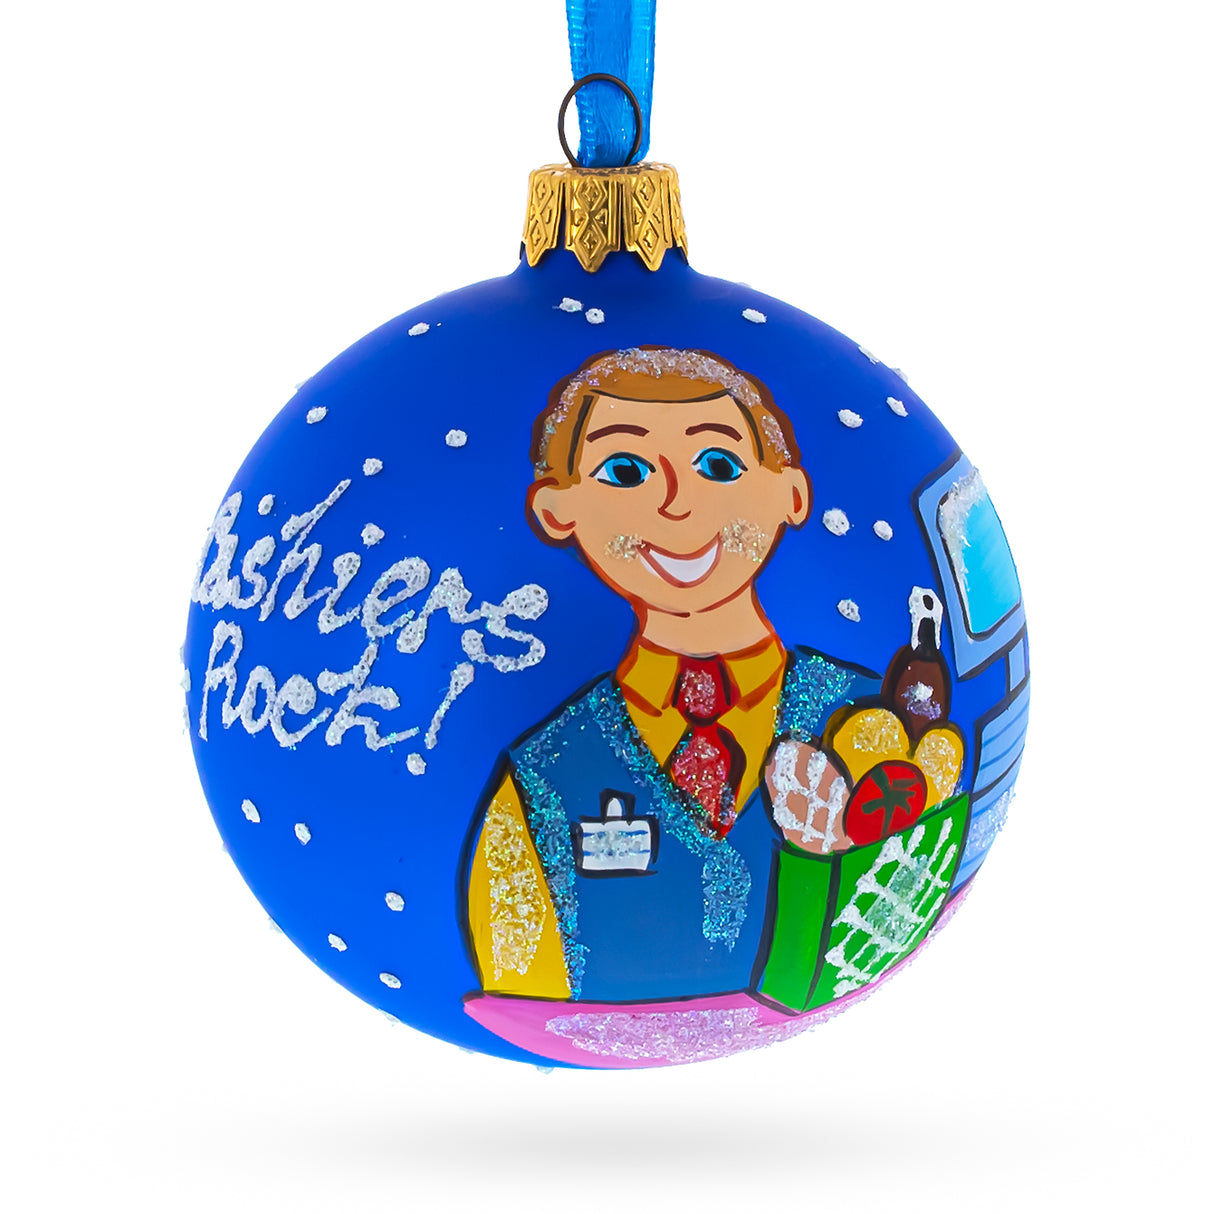 Glass Checkout Cheer: Cashier Blown Glass Ball Christmas Ornament 3.25 Inches in Blue color Round